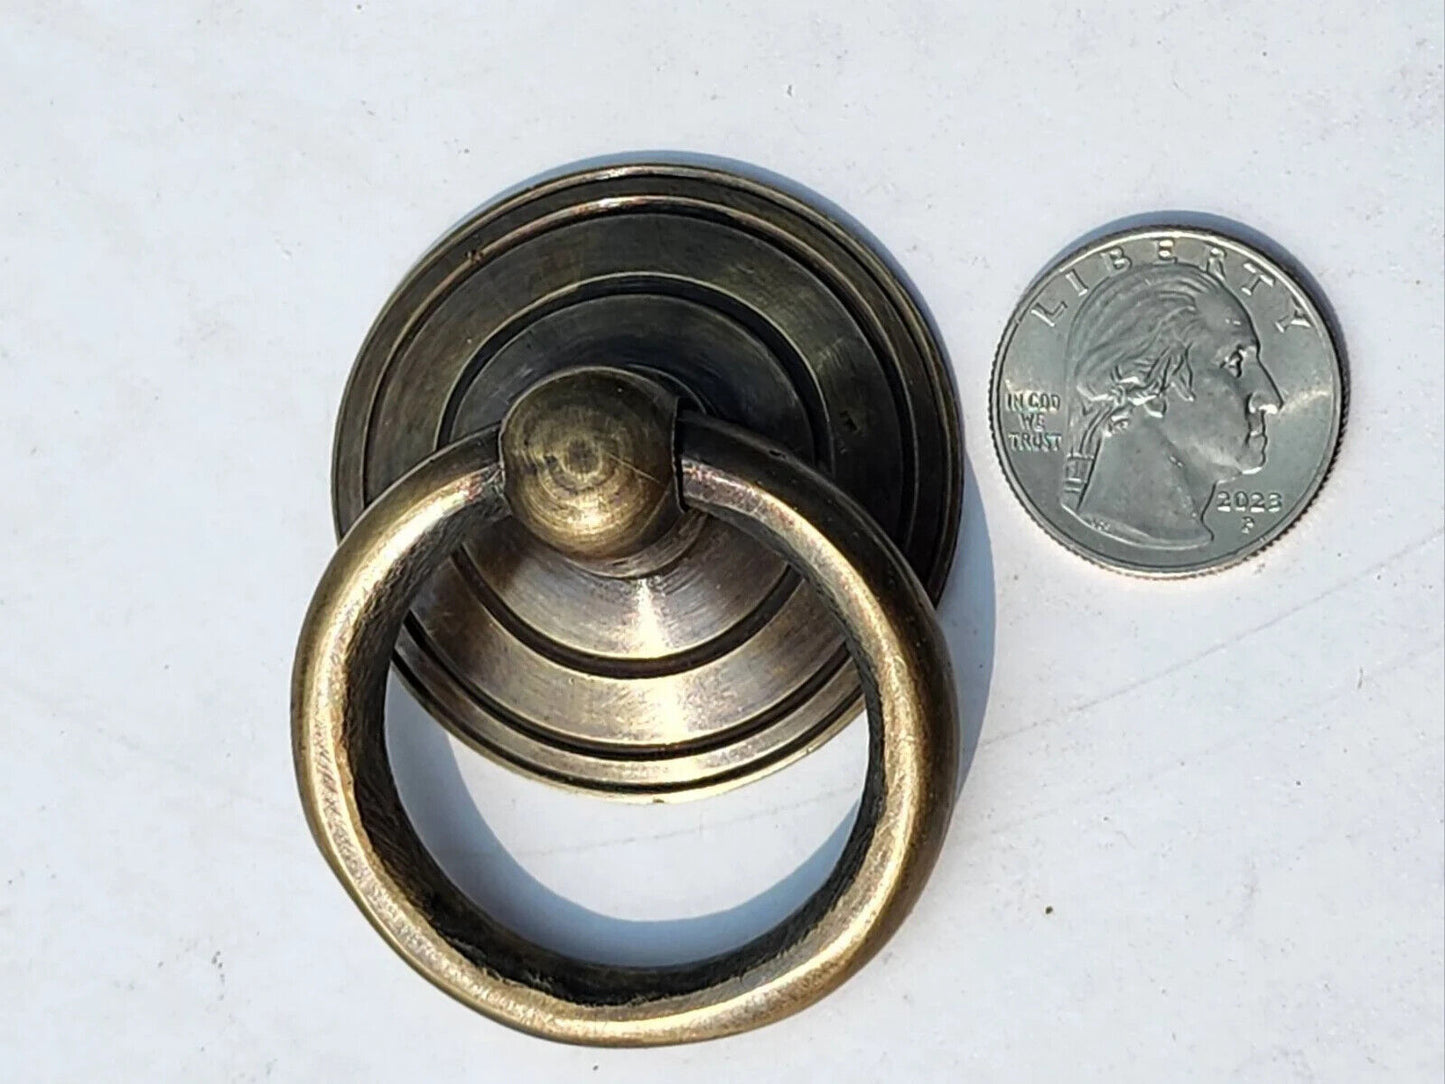 Rustic Antique Style Solid Brass Round Ring Pull Handles Backplate 1-3/4"dia x Ring Pull 1-3/4"dia #H2